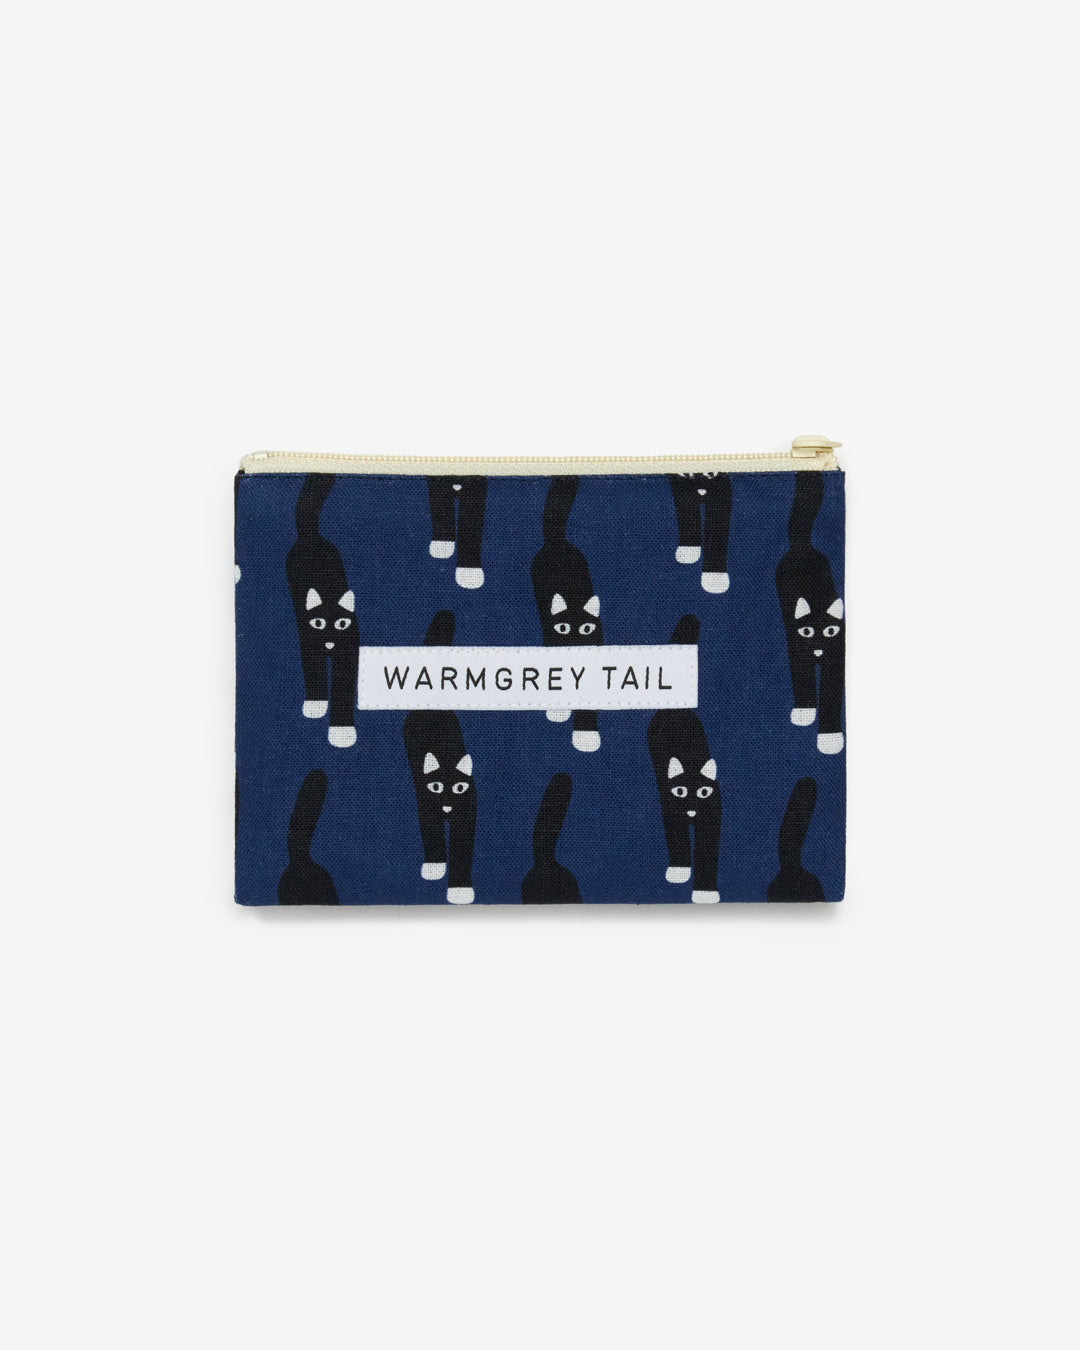 CAT COMING FLAT POUCH - NAVY (2size)